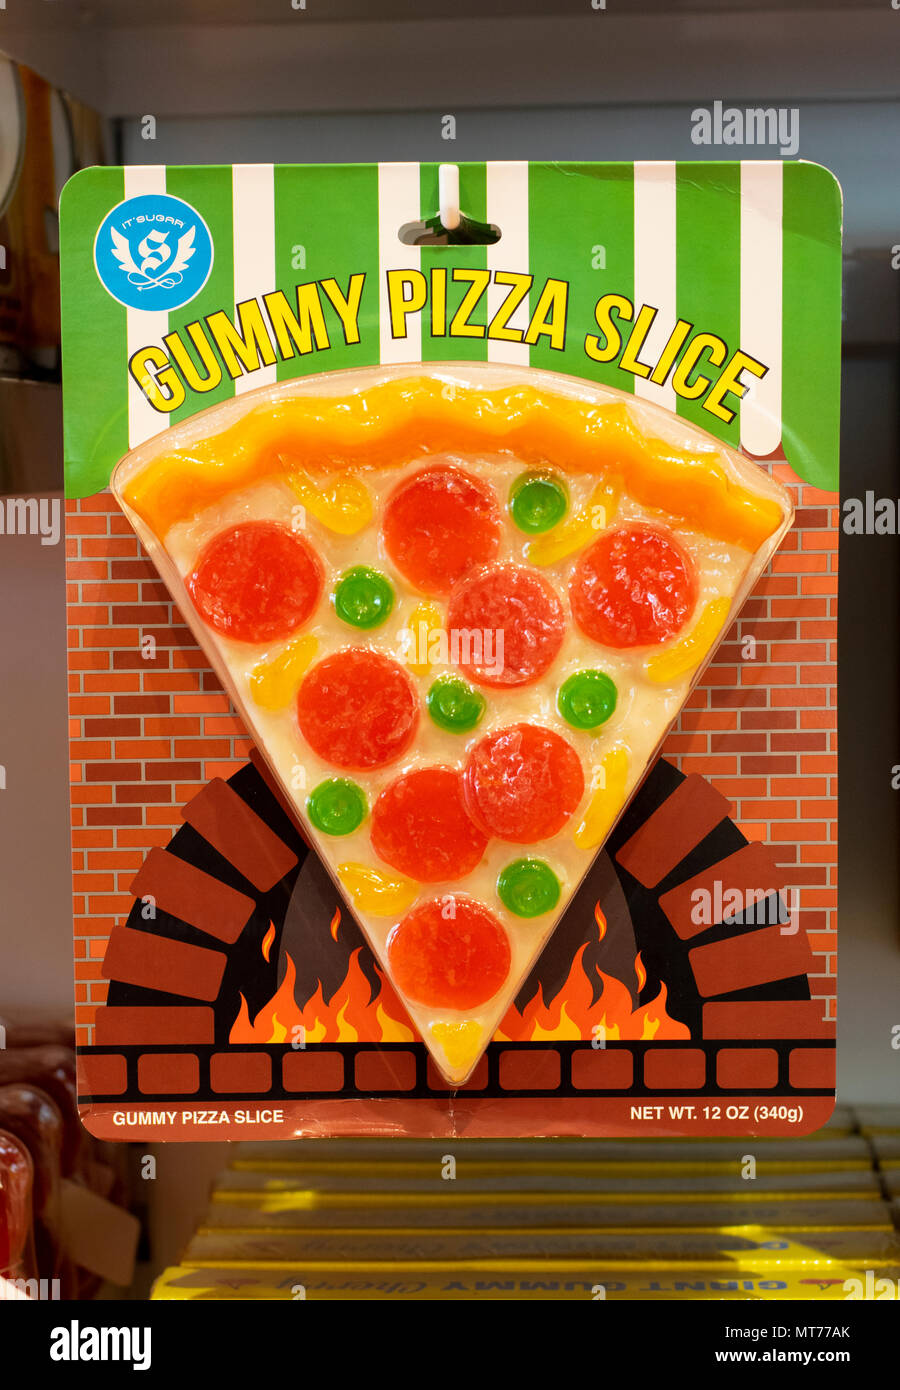 GUMMY PIZZA SLICE, a gummy bear type candy that looks like a slice of pizza. At It'sugar in the Tanger Outlets in Deer Park, Long Island, New York. Stock Photo